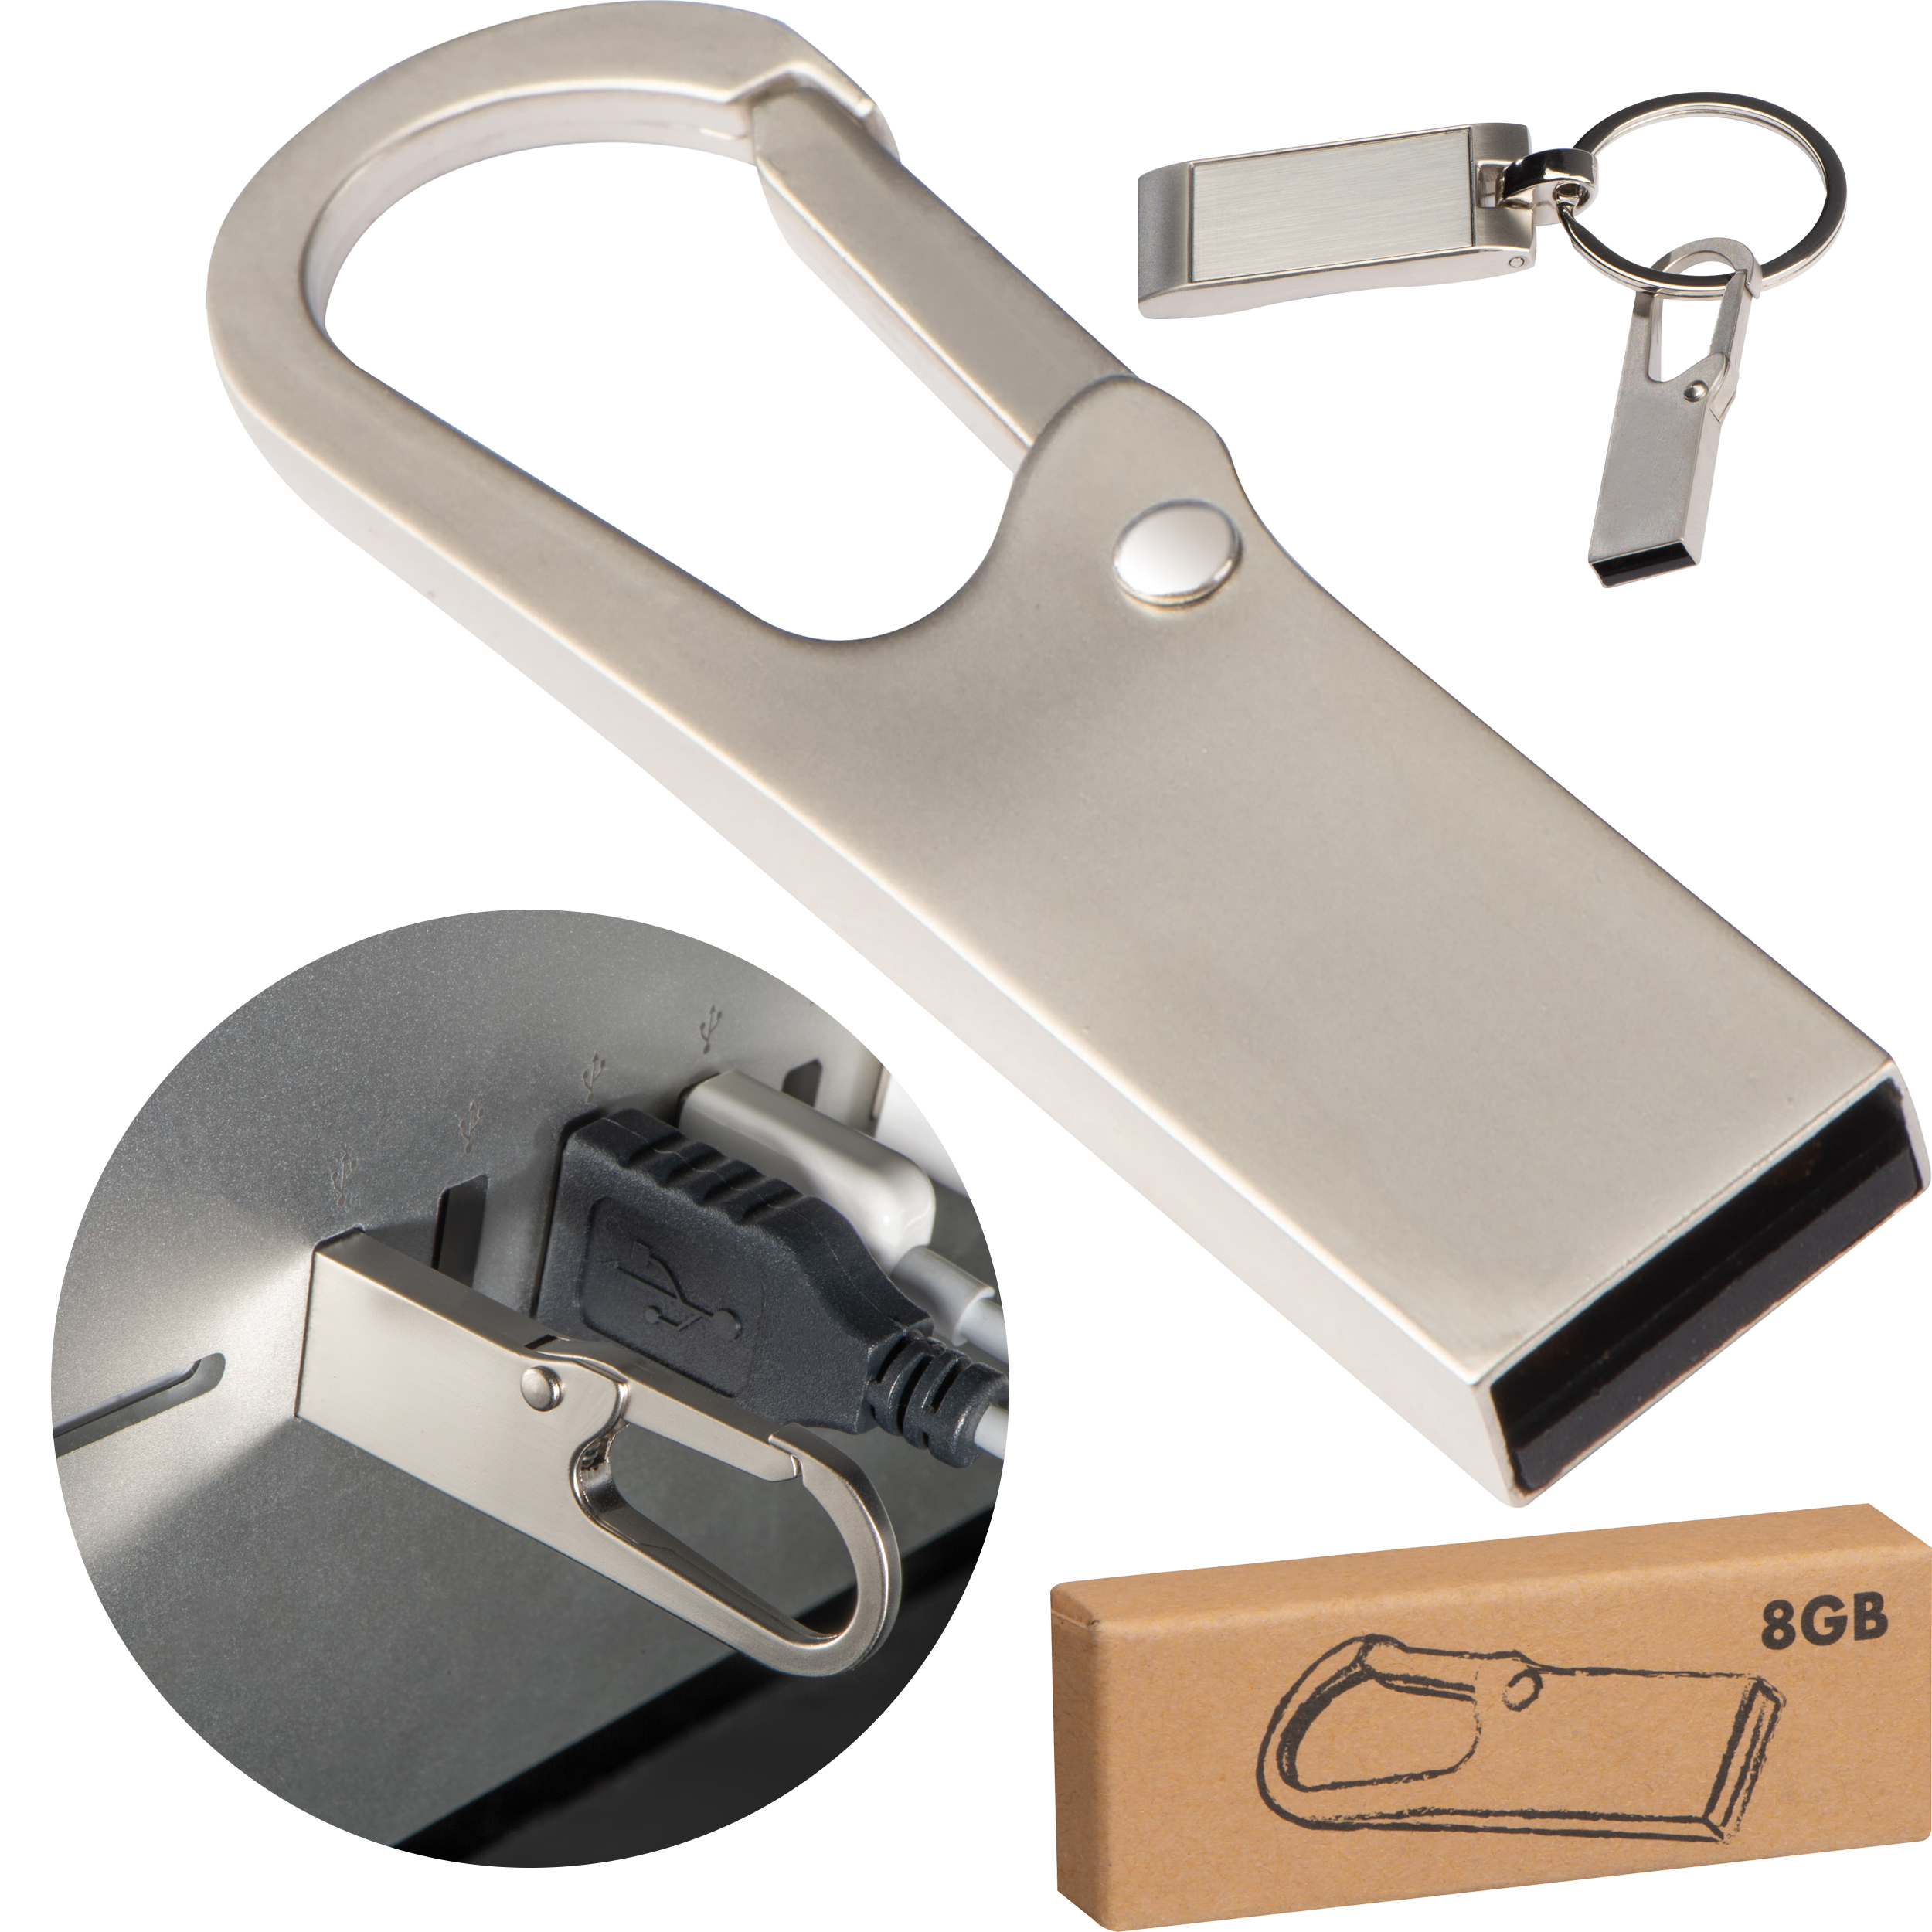 Metal USB stick with carabiner - 8GB